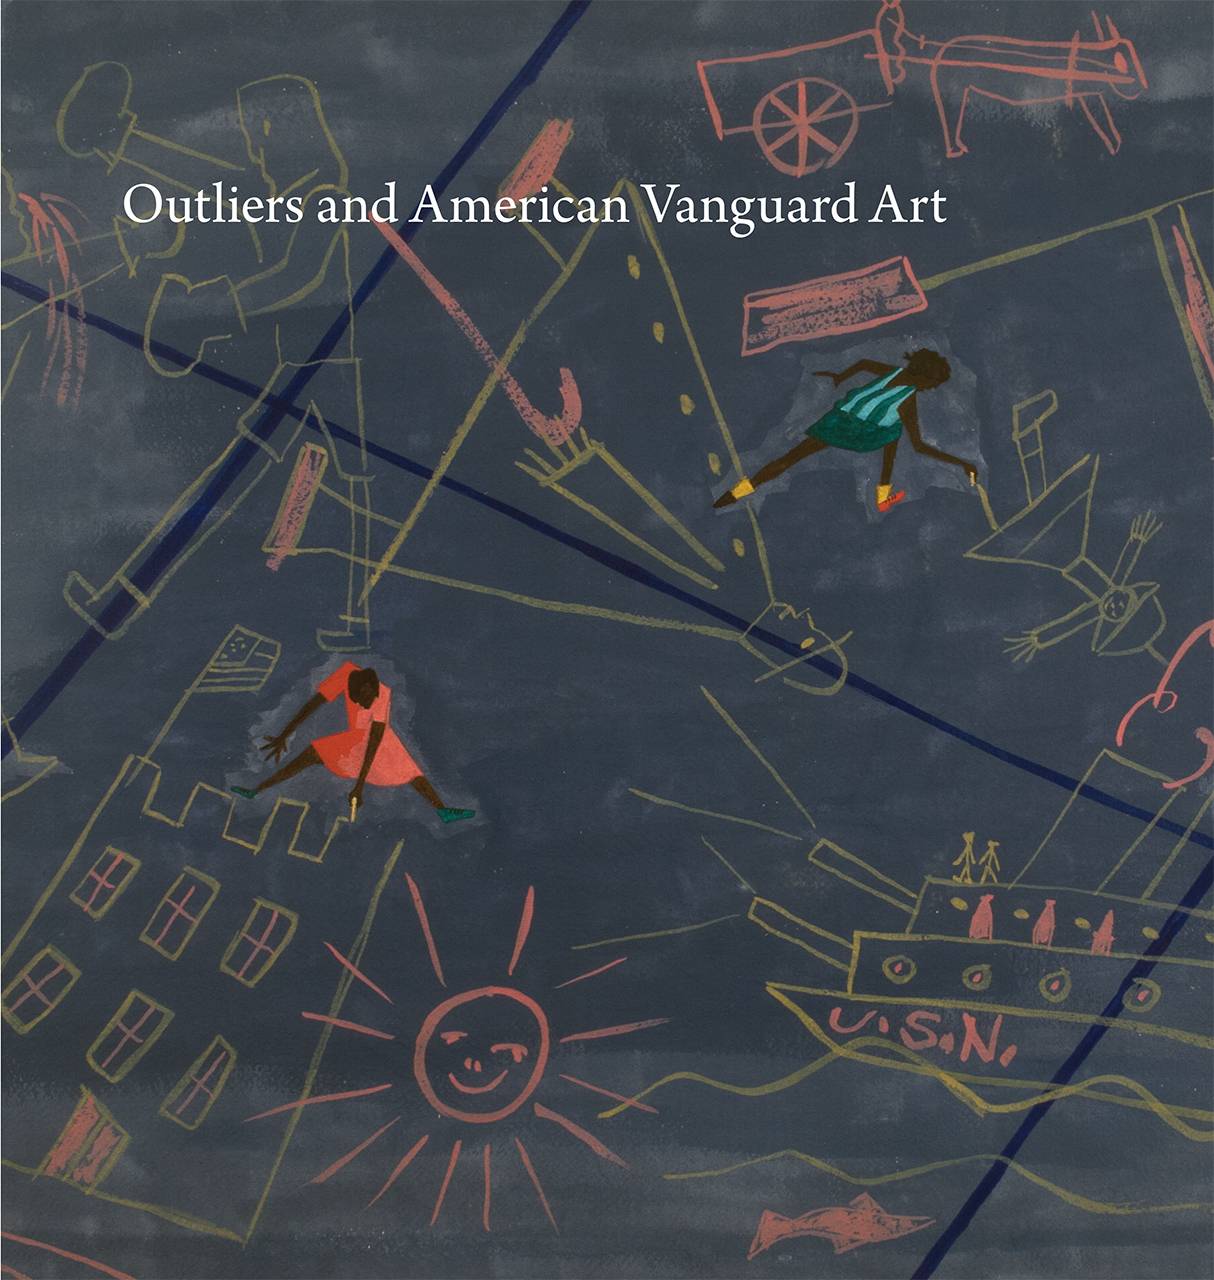 Outliers and American vanguard art by Lynne Cooke with Douglas Crimp [and six others].